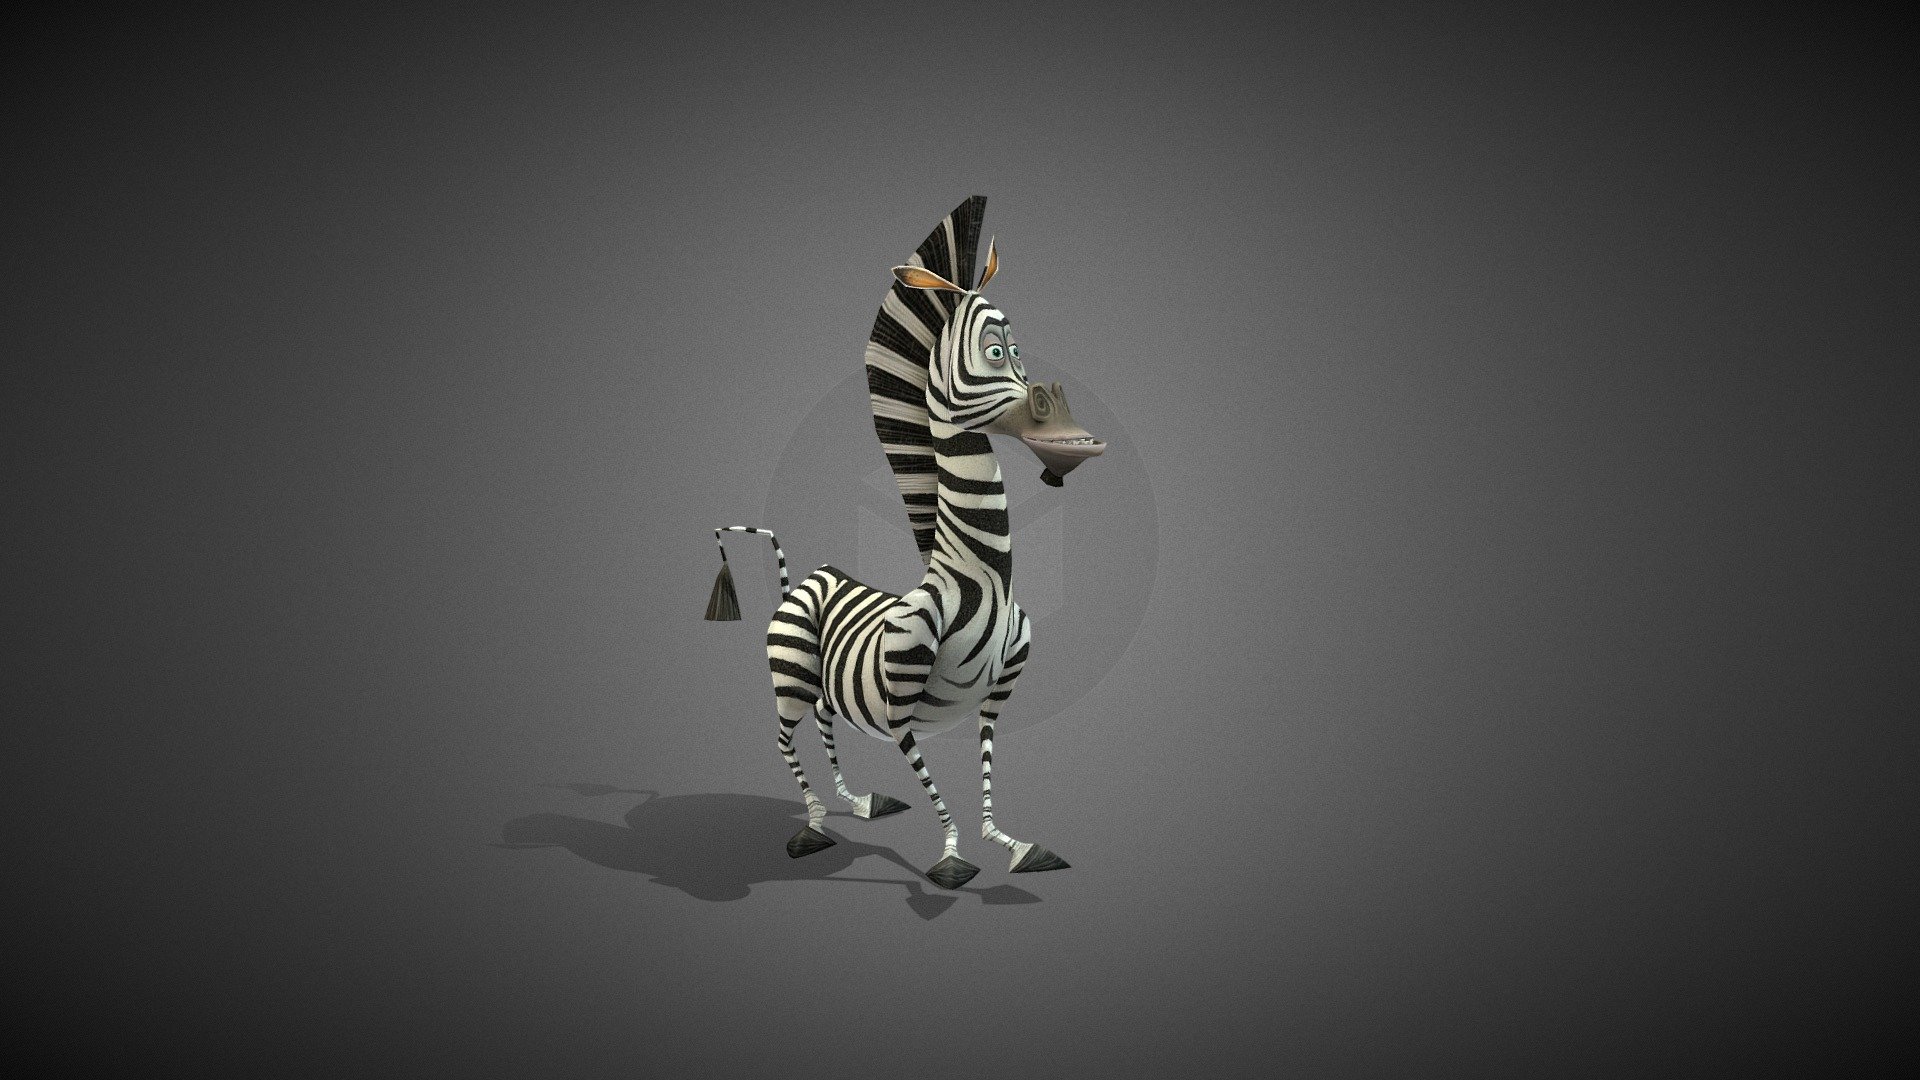 The zebra(Marty) of 《Madagascar》 ，Made by 3DMAX .Include FPX and obj .
The zebra and the lion were originally enemies on the lower part of the food chain, but because they grew up together in the zoo, Marty and Alex have become a pair of inseparable friends. Unlike Alex's king style, Marty is born to ruminate, constantly talking about whether he is white on black or white on black, and often daydreaming about exaggerated things 3d model